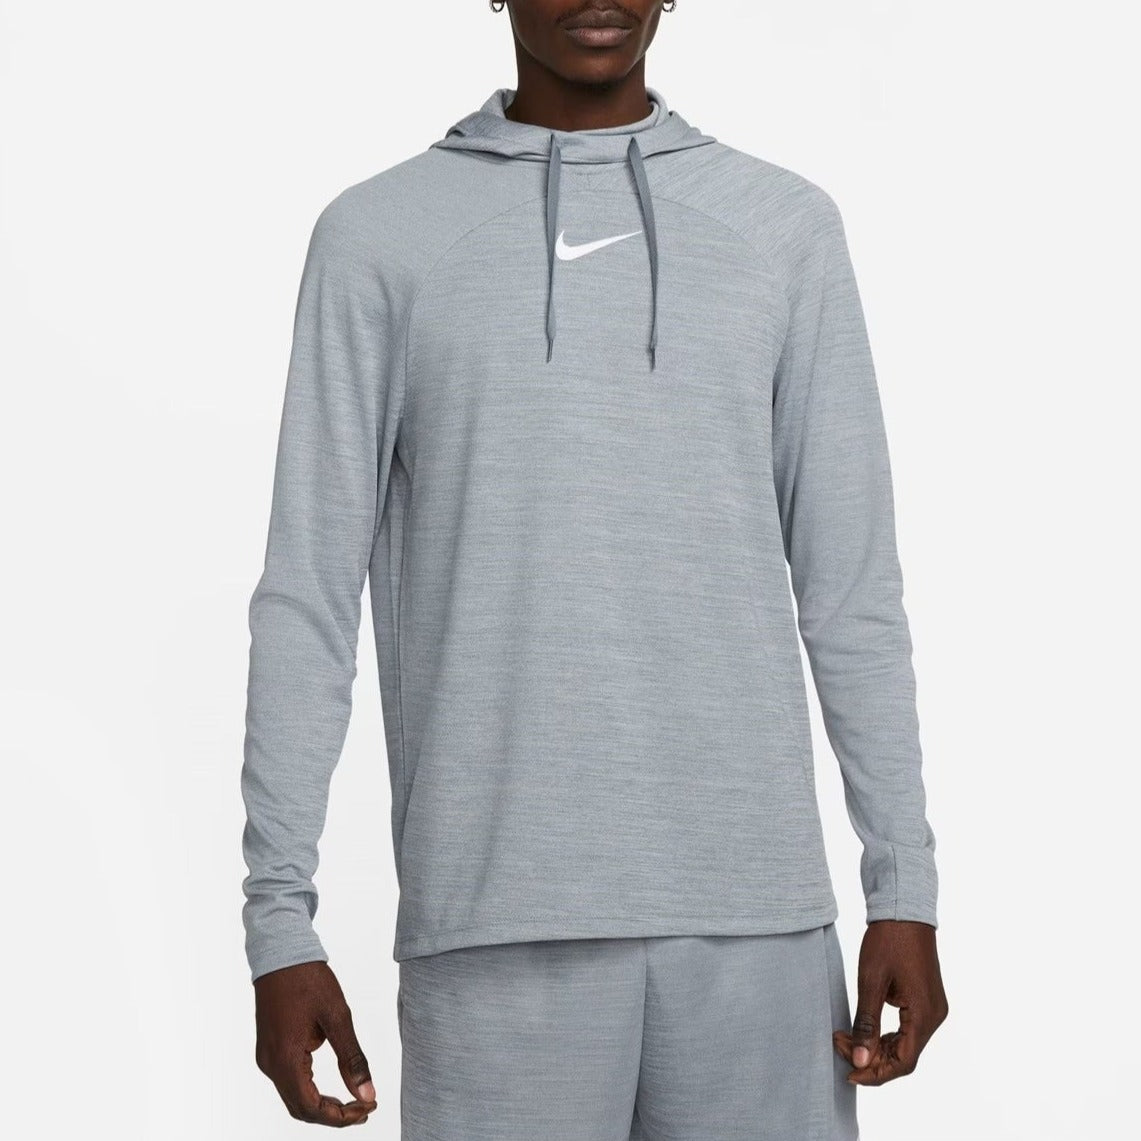 NIKE ACADEMY PRO PULLOVER HOODIE - COOL GREY